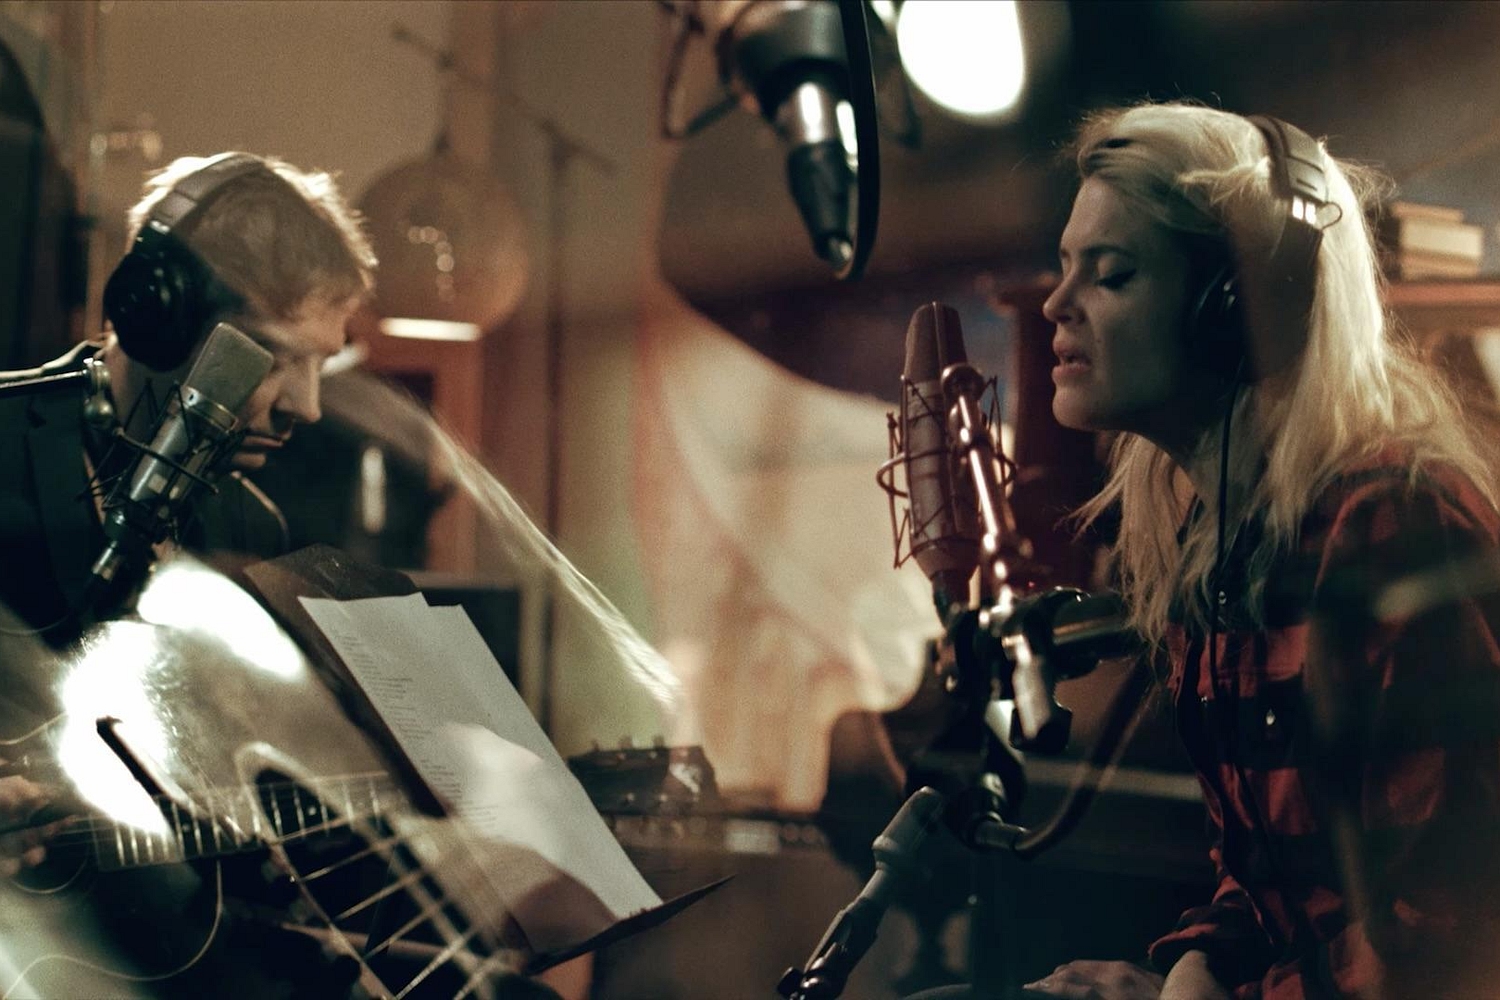 The Kills have announced new acoustic EP ‘Echo Home – Non-Electric’